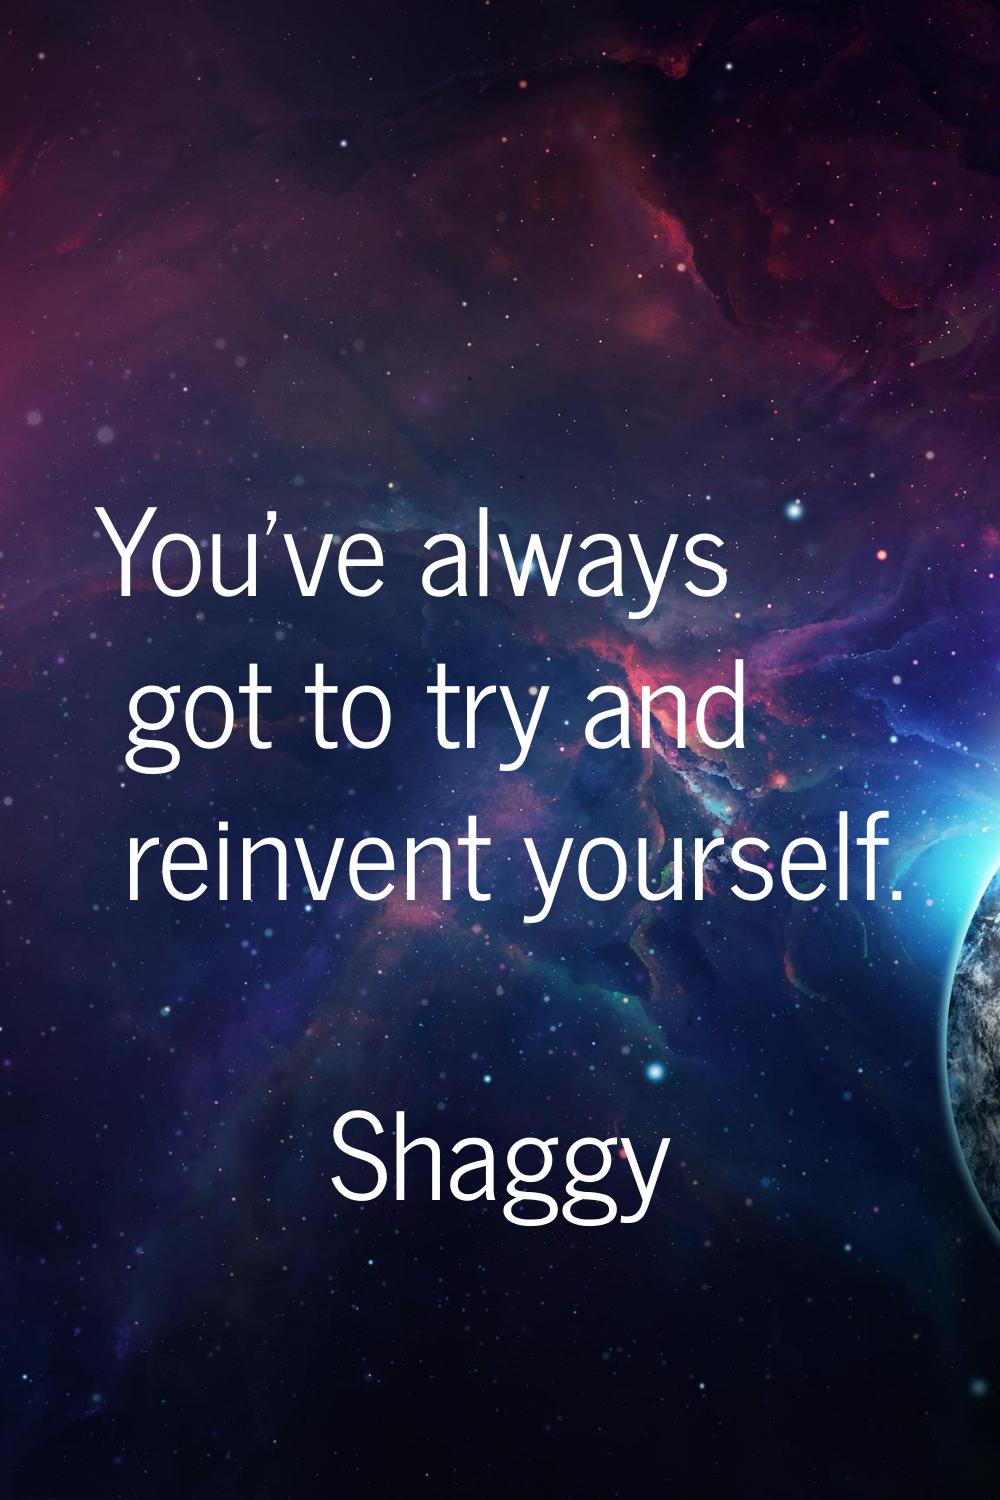 You've always got to try and reinvent yourself.